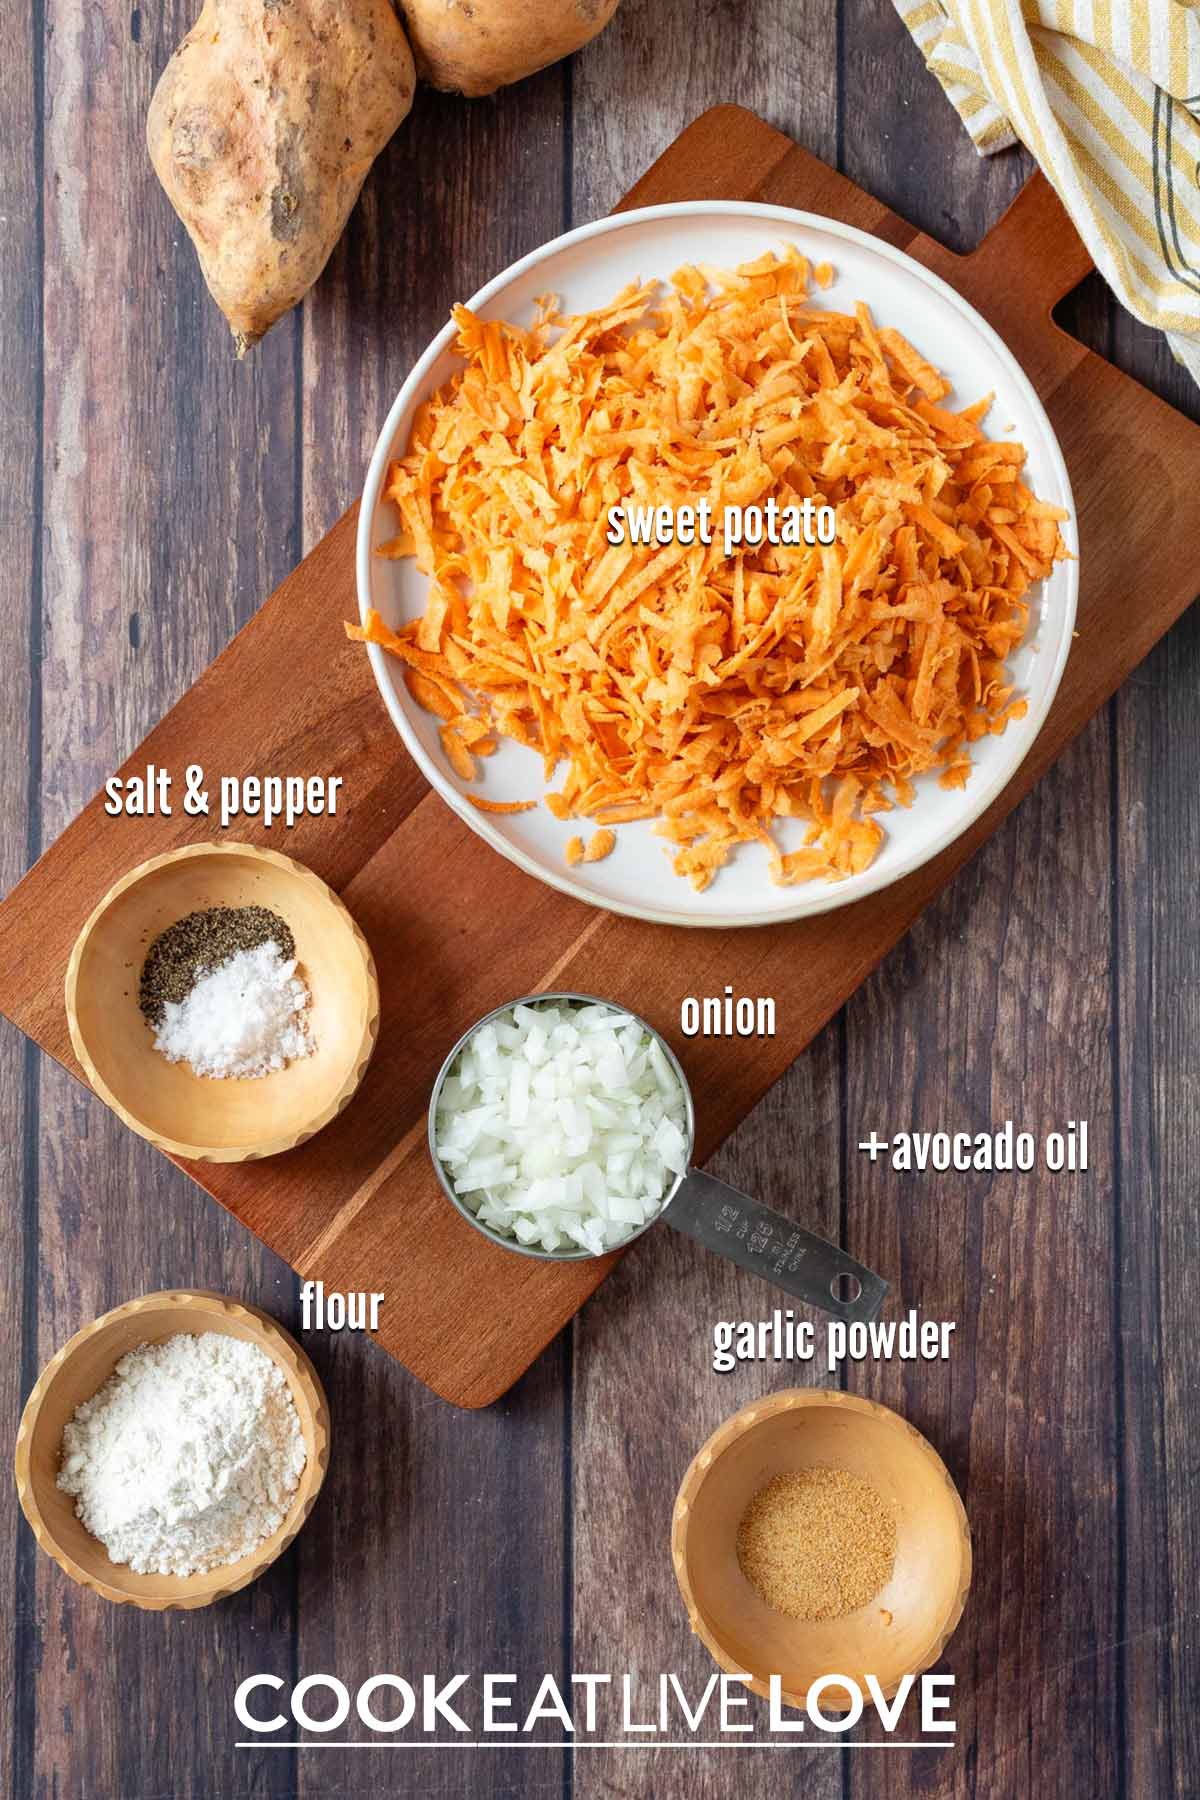 Ingredients to make sweet potato hashbrowns on the table.